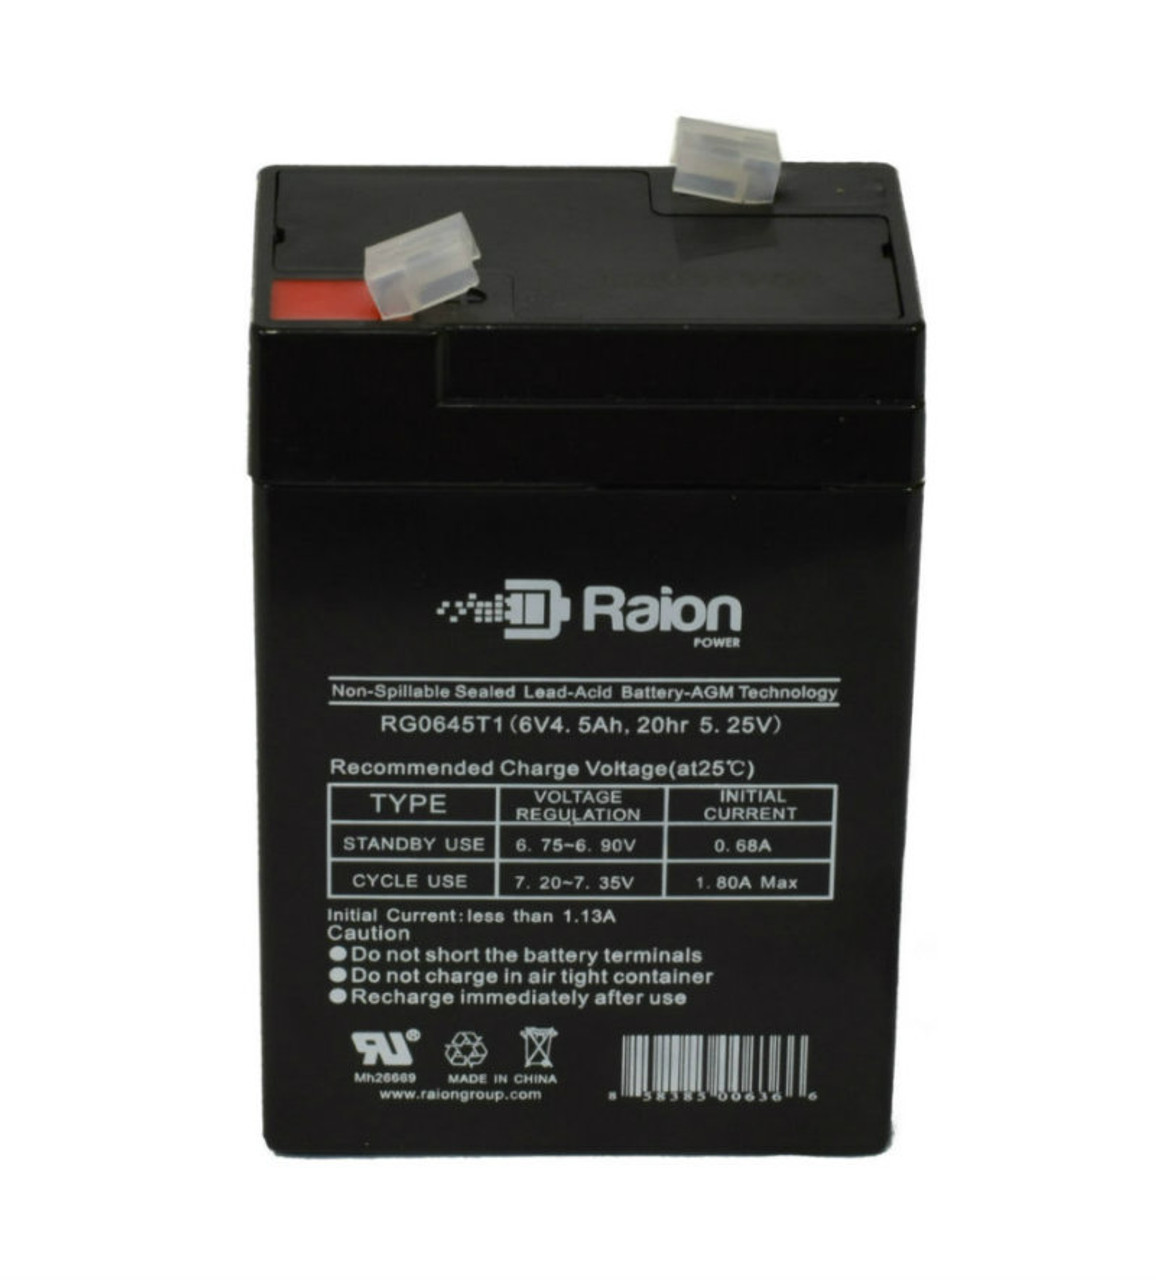 Raion Power RG0645T1 Replacement Battery Cartridge for Peg Perego IGED1107 6V Racer